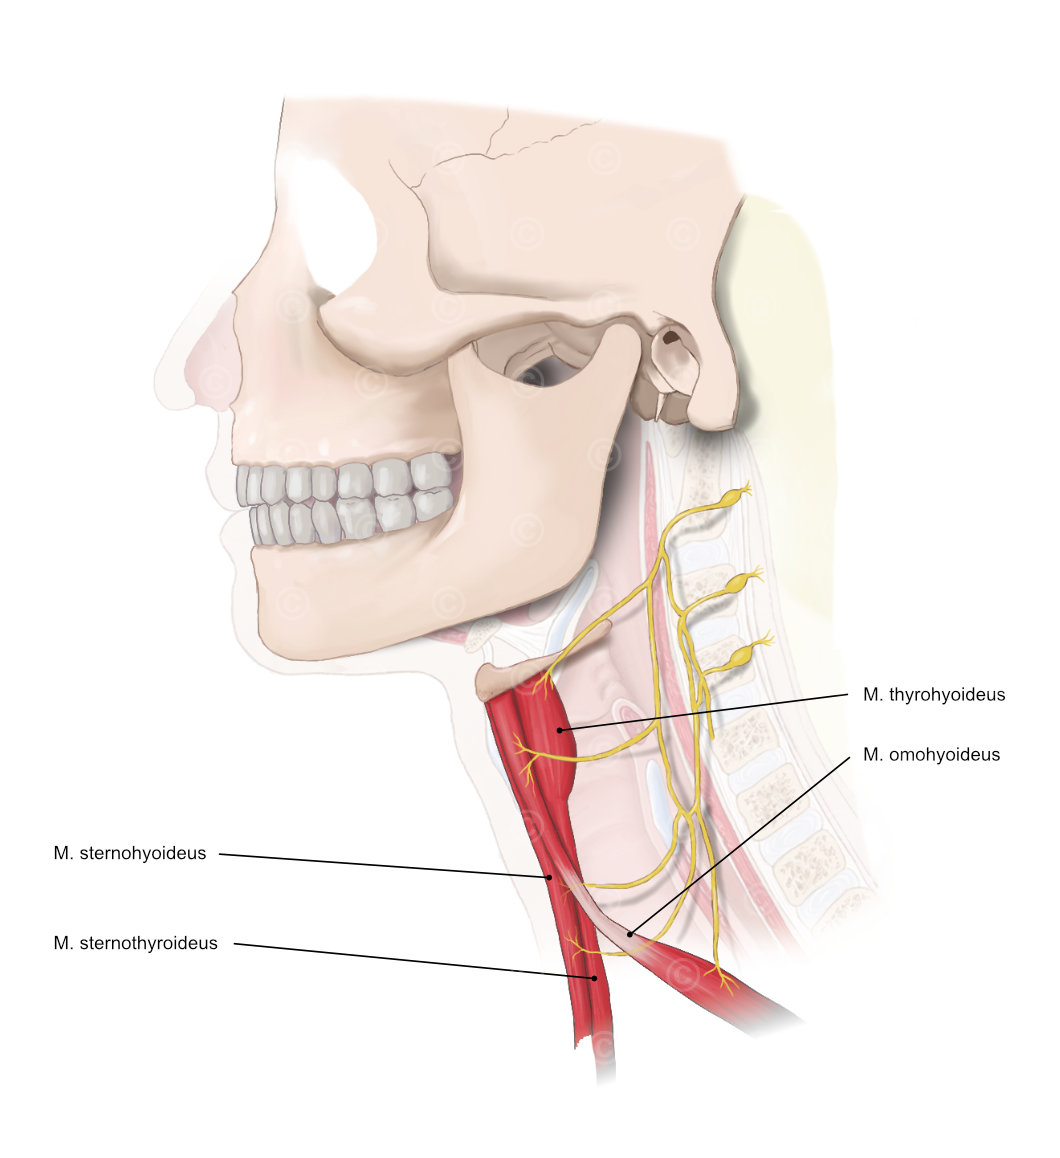 Anatomy nerves swallowing process - MedicalGraphics